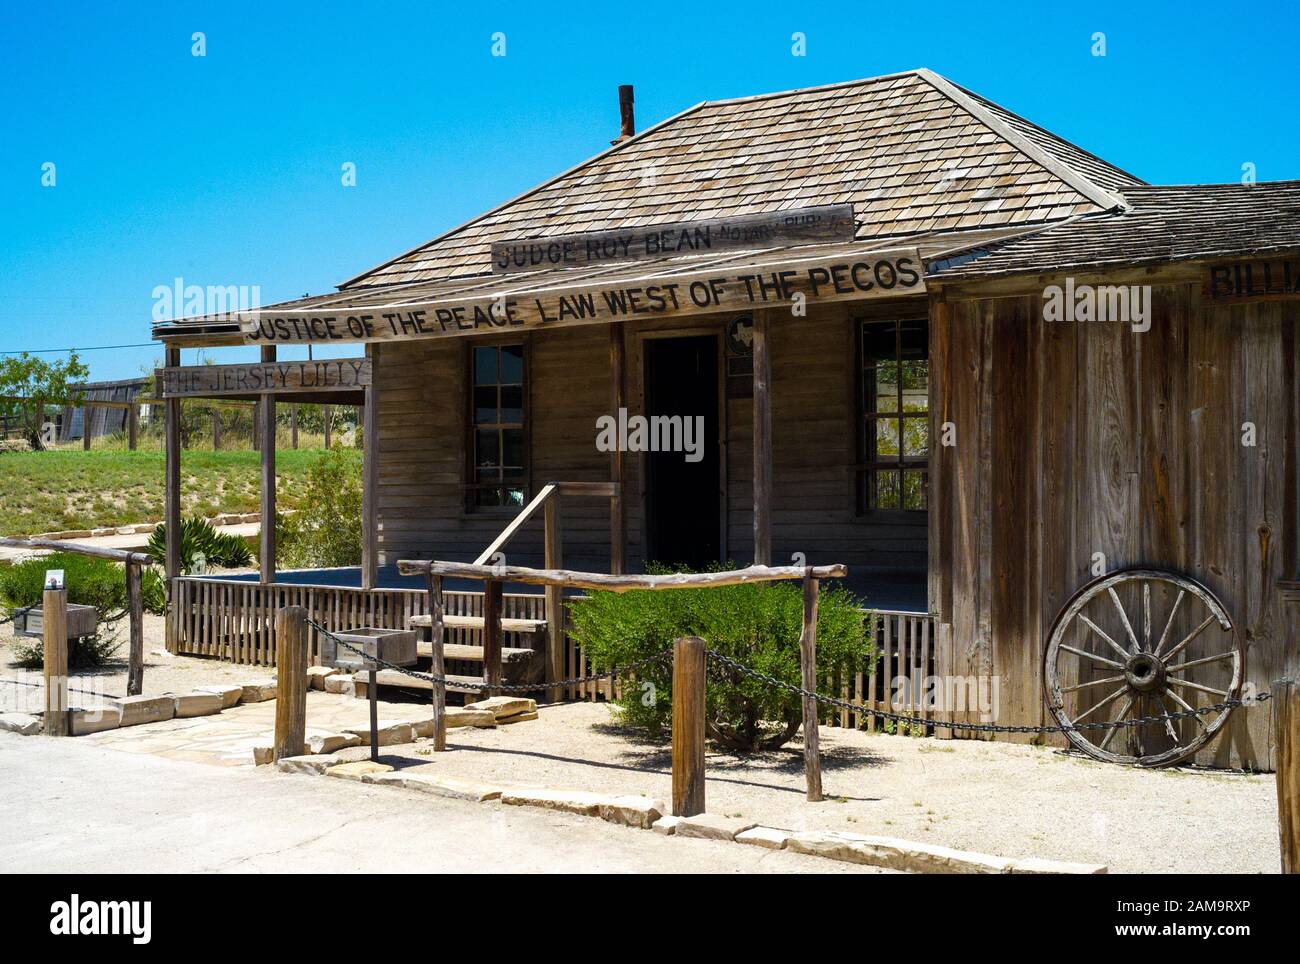 Langtree, Texas, USA - 14. Juli 2009: Richter Roy Been Saloon and Court House Museum, Langtry, Texas Stockfoto